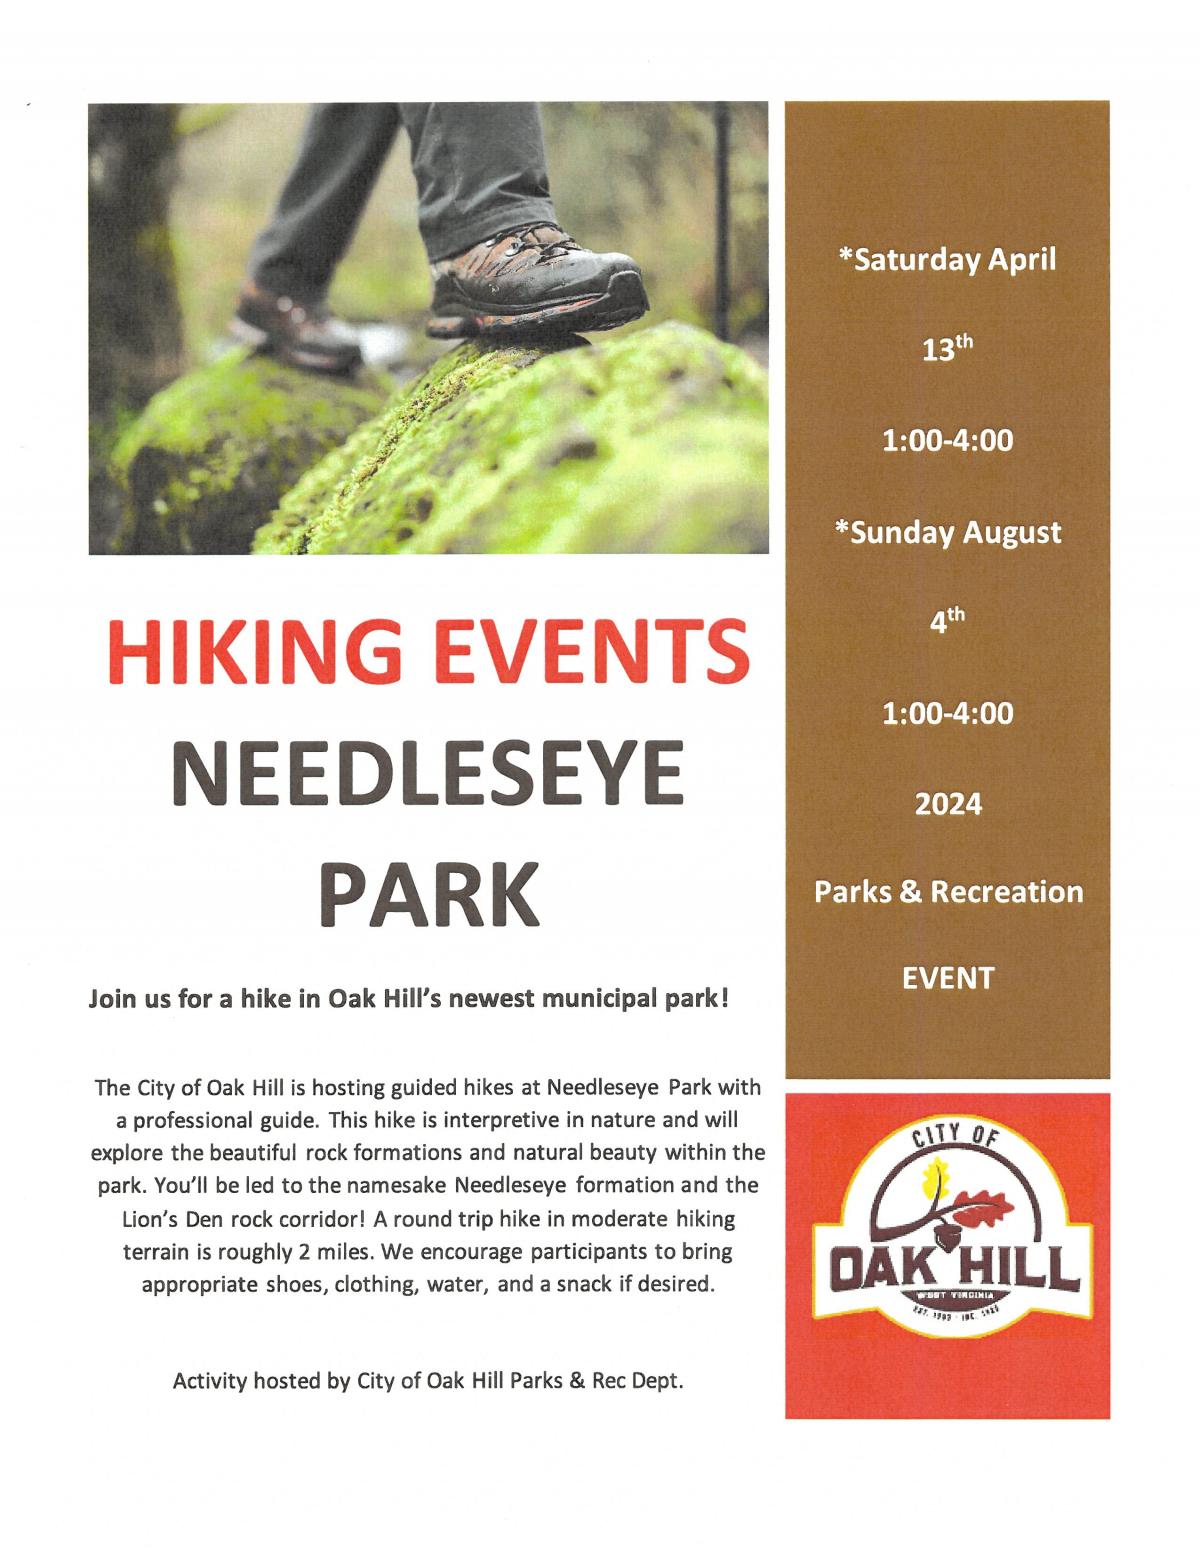 Hiking Events Scheduled @ Needleseye Park